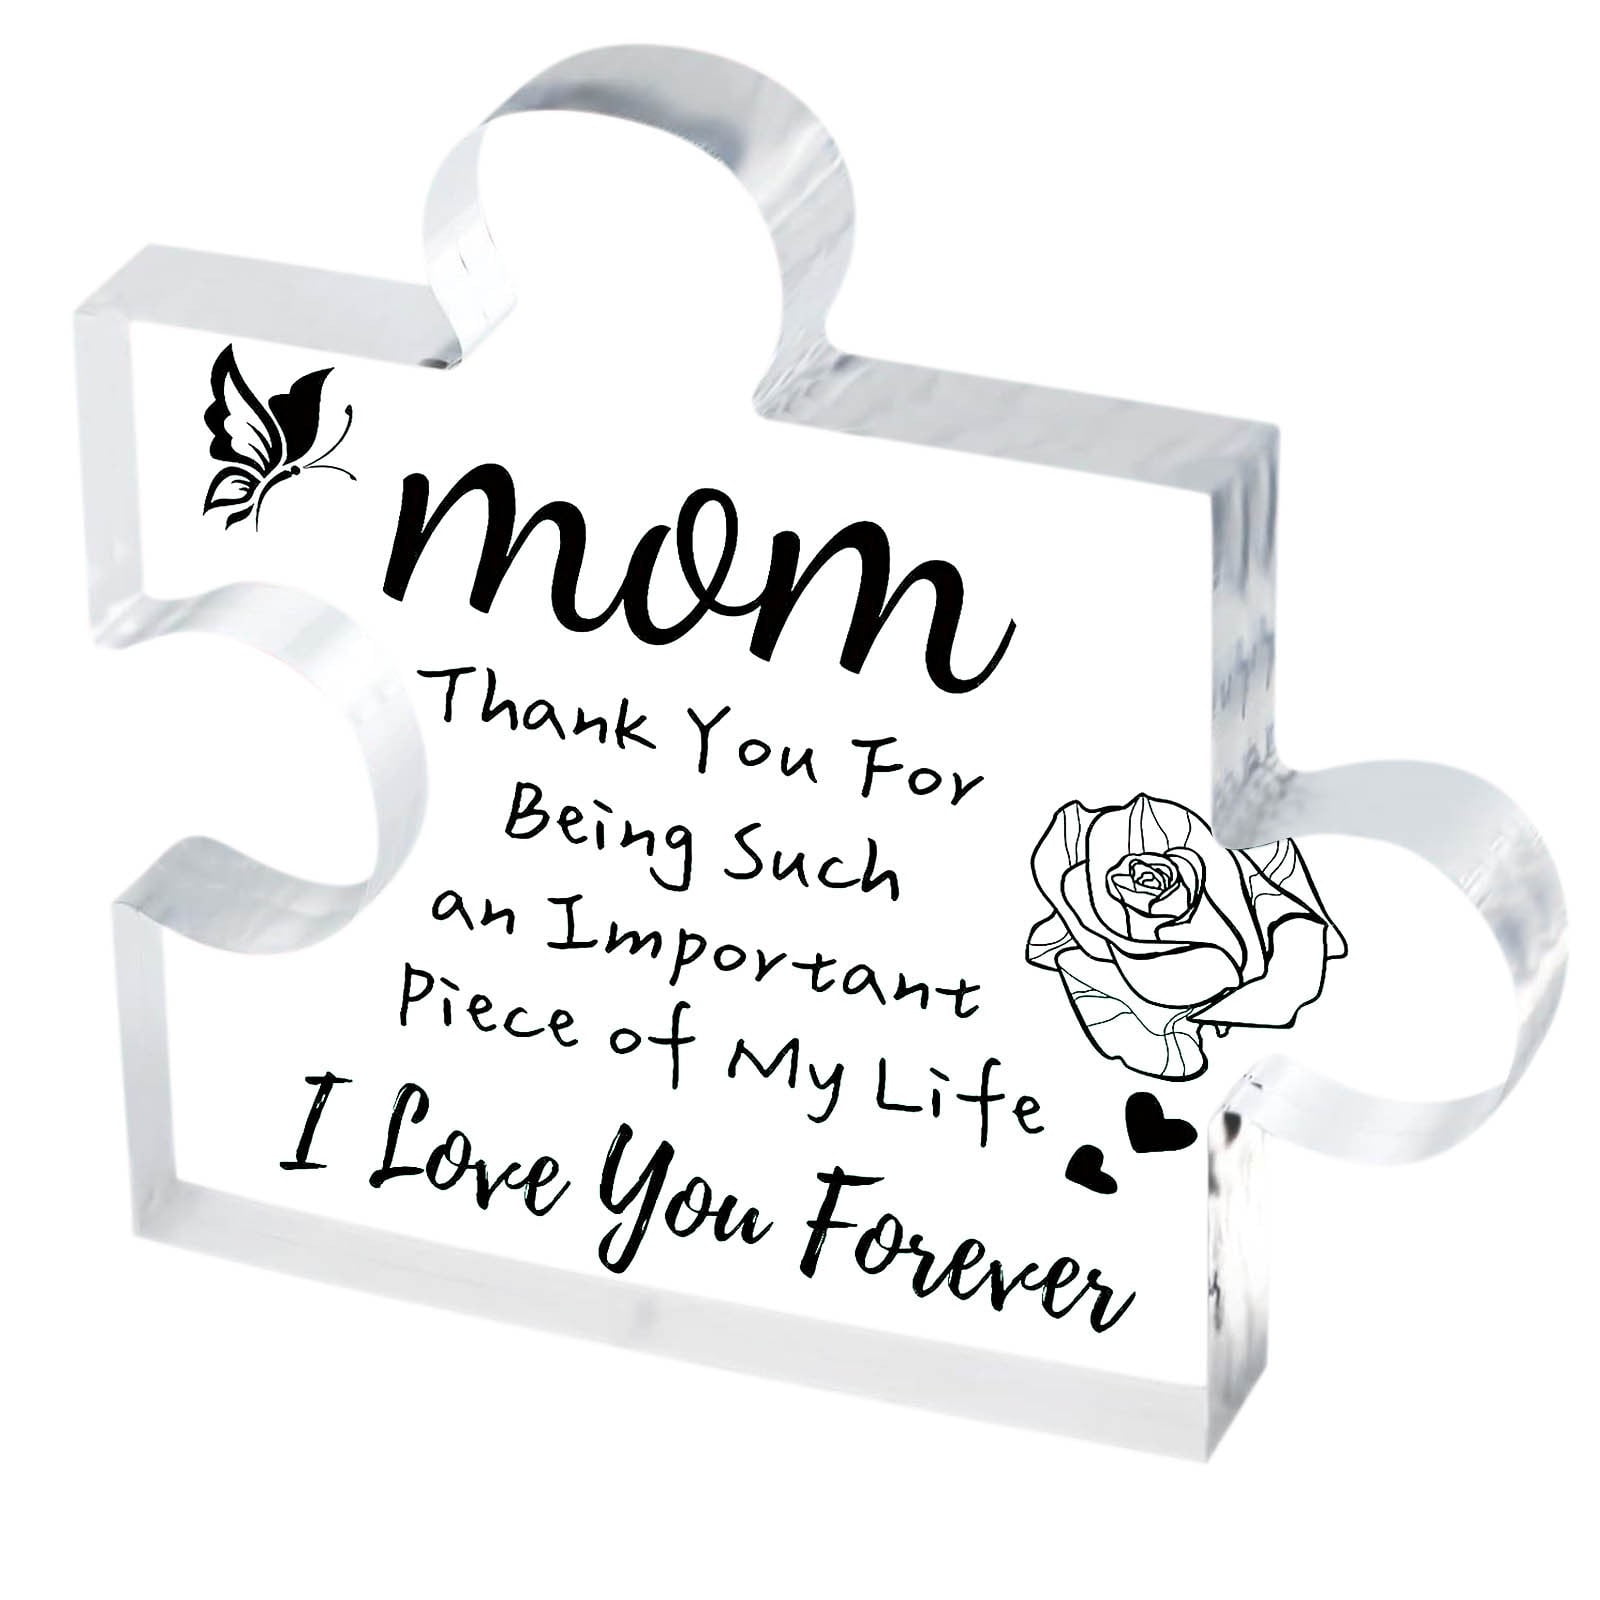 Son Gifts, Engraved Acrylic Block Puzzle Gifts for Boys from Mum